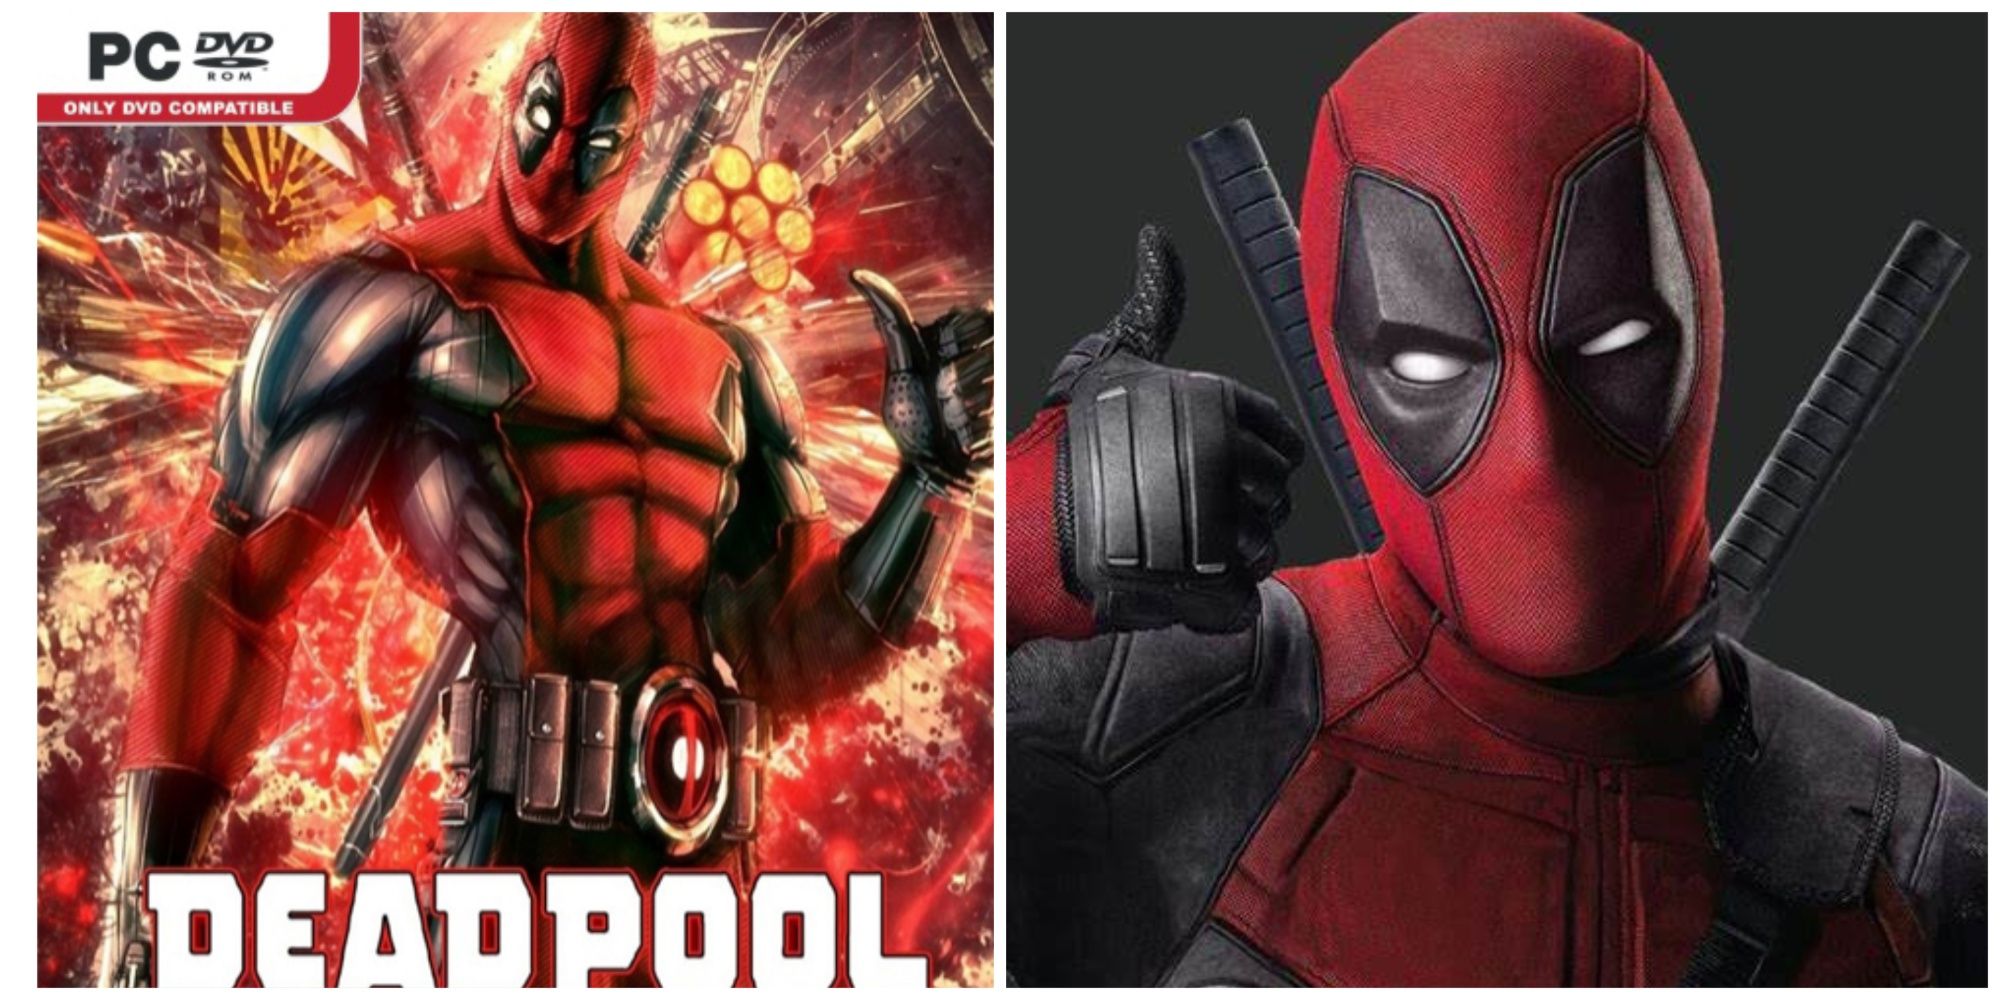 Deadpool 2013 Game and 2016 Movie Poster